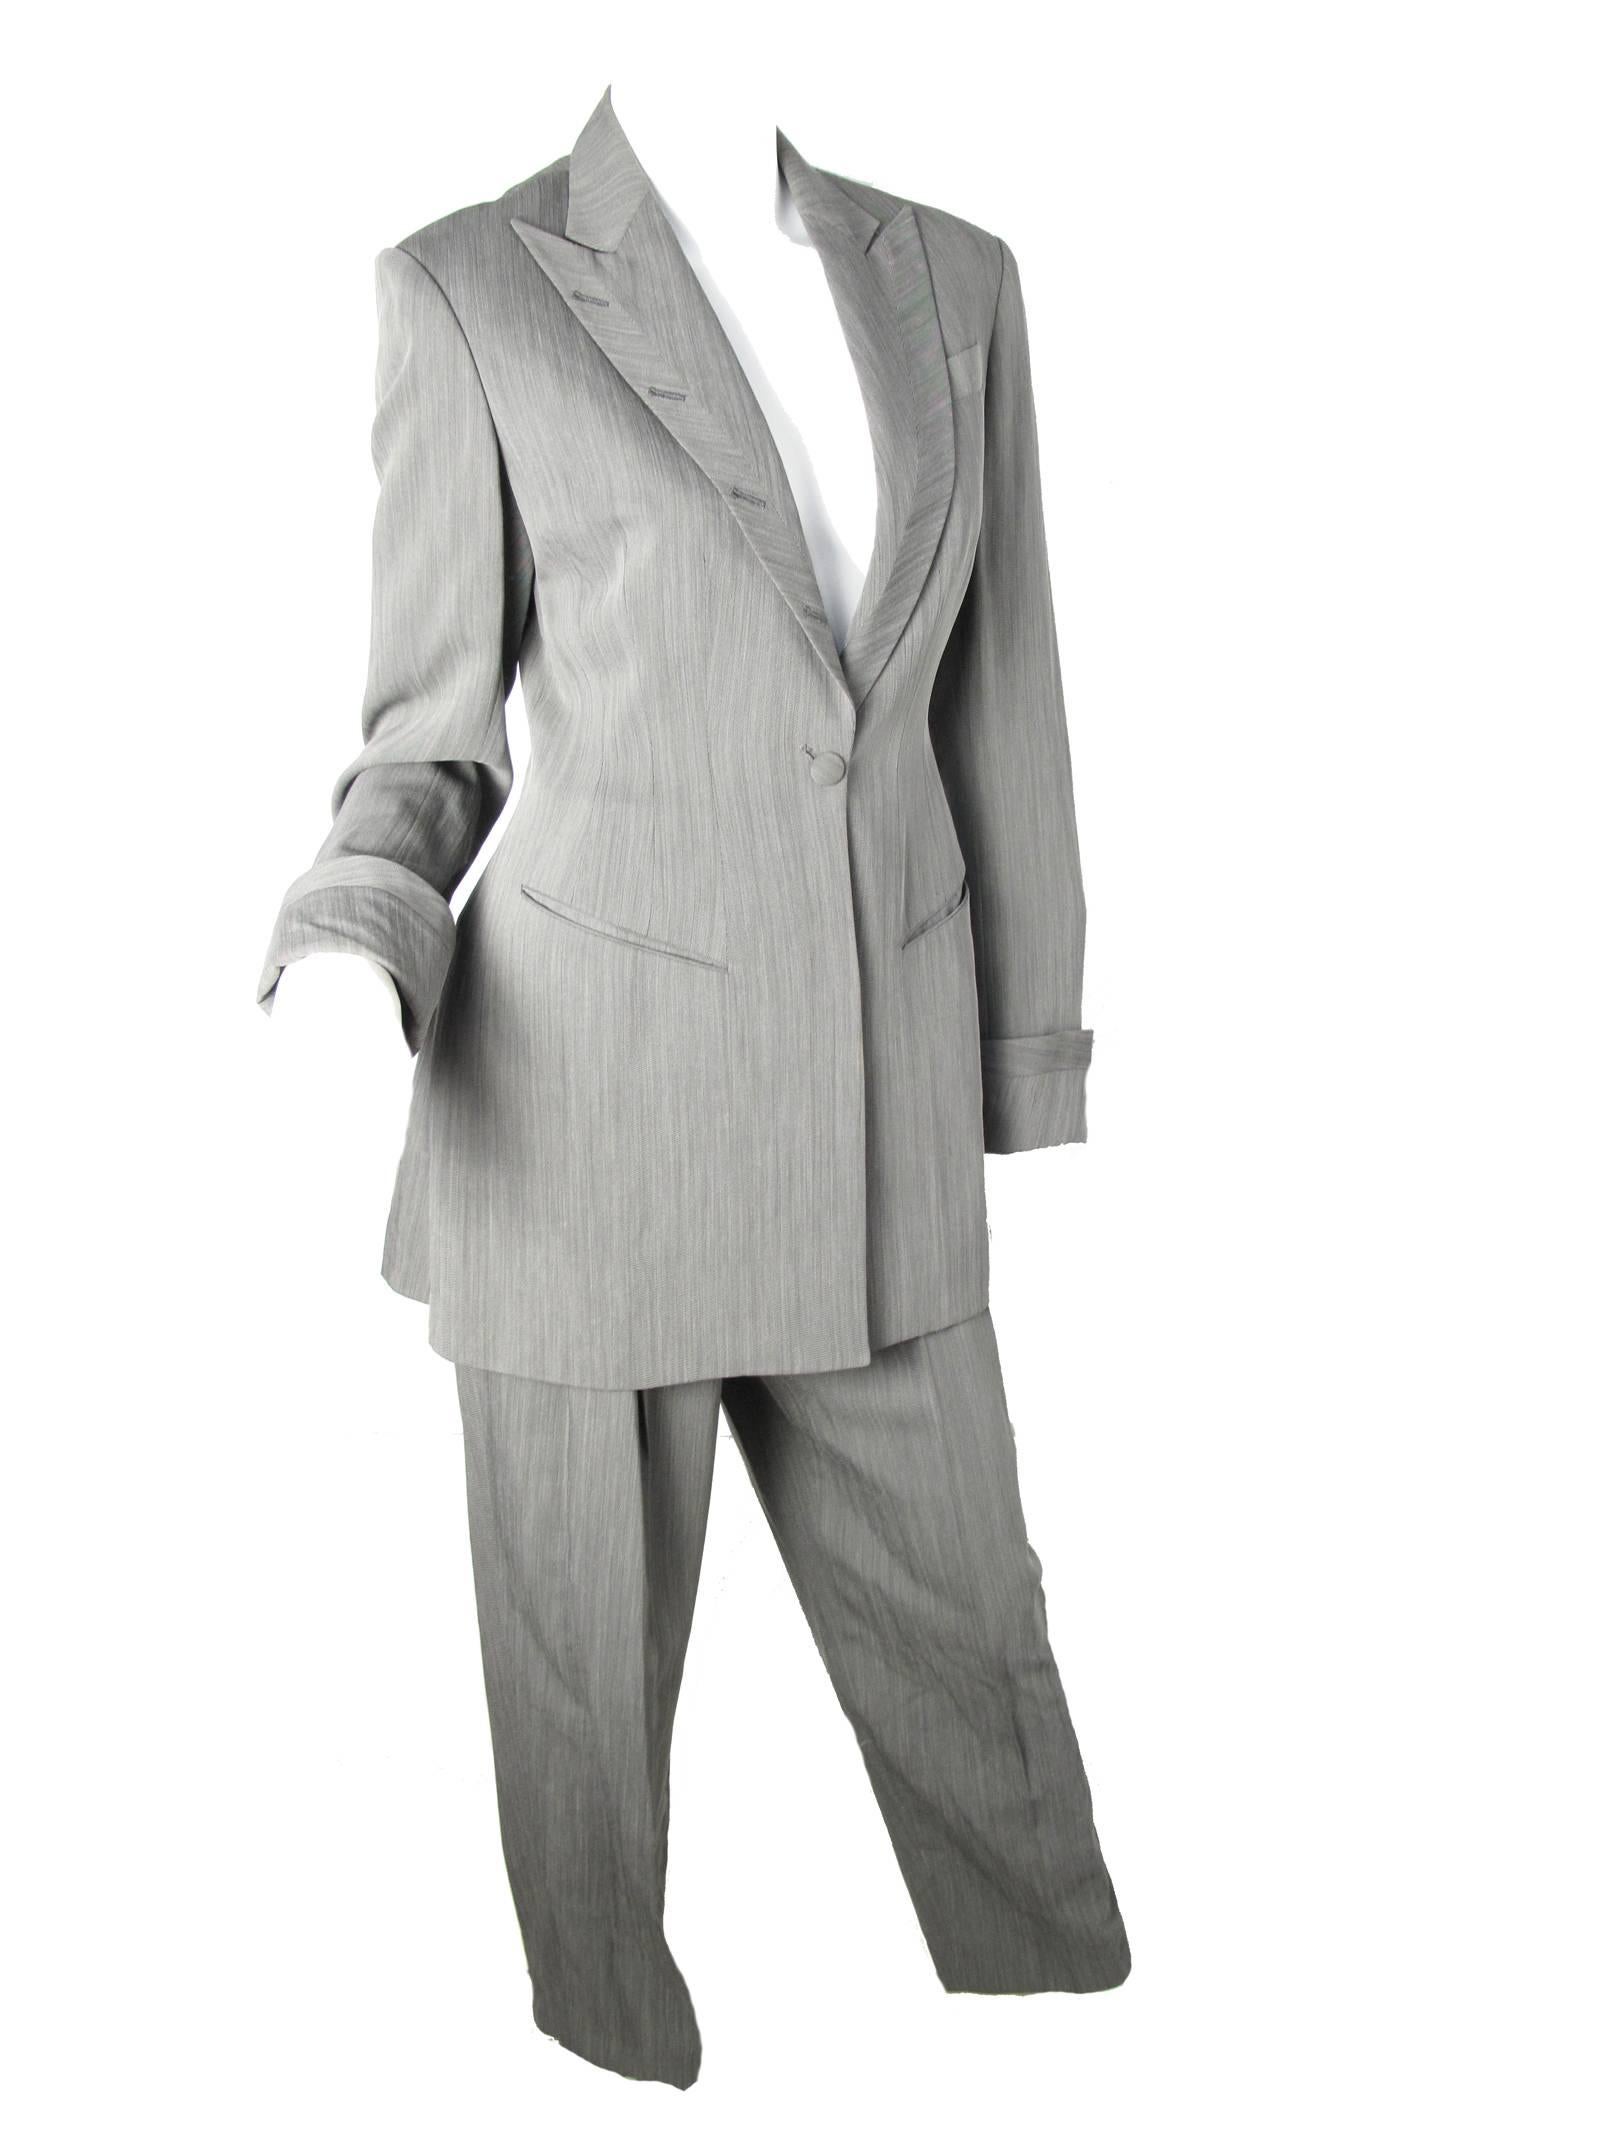 Richard Tyler grey suit with front pockets and button holes up collar.  Viscose, wool, polyamide grey suit with silk lining. Made in USA. Condition: Excellent.  Size 4 
Jacket: 34